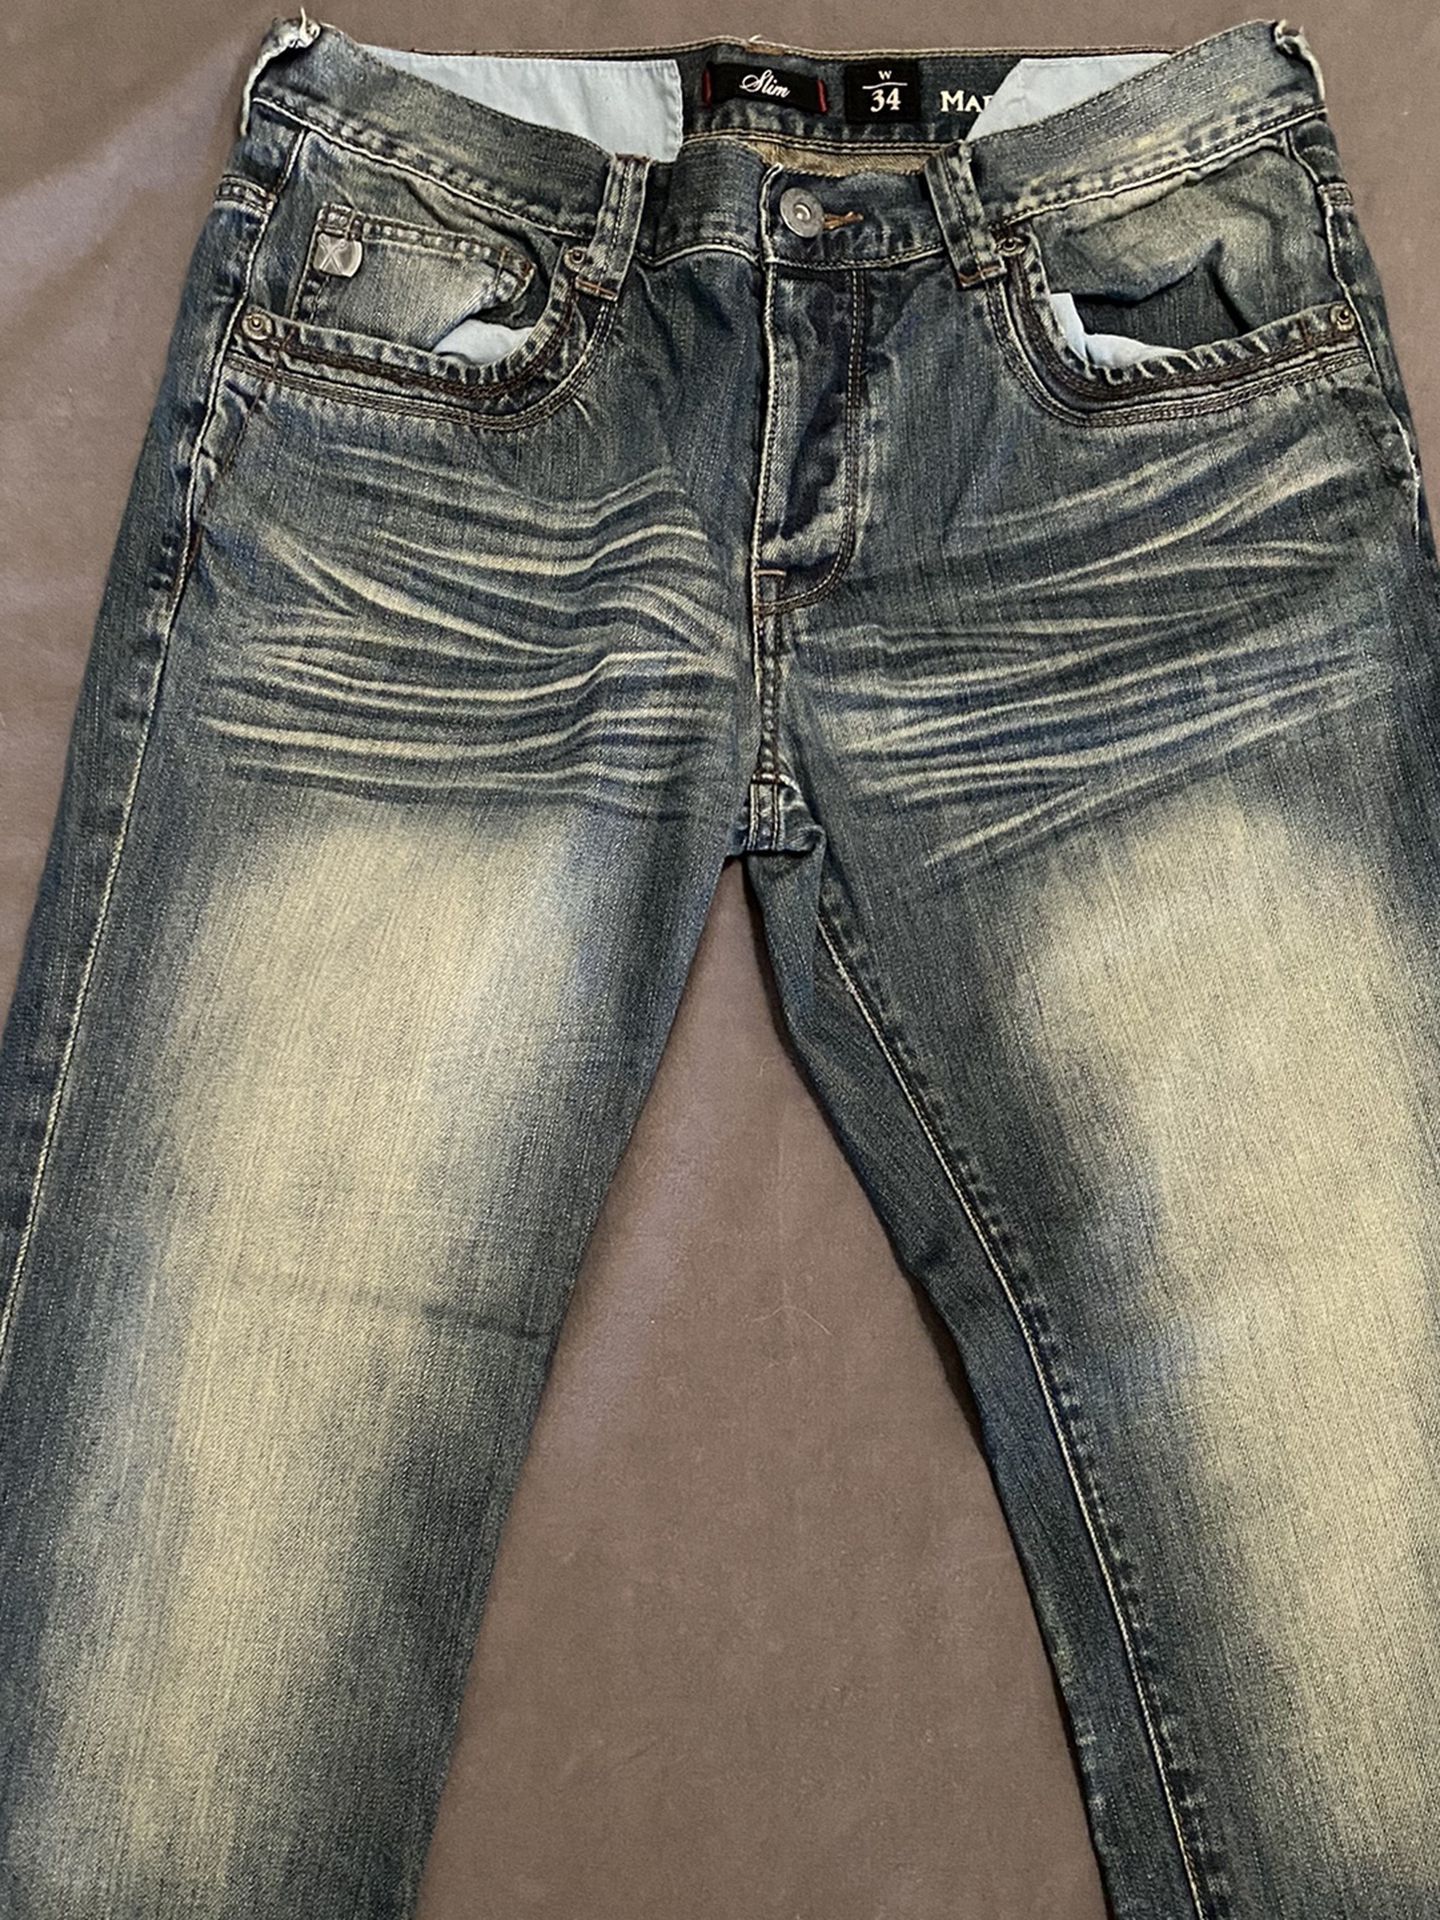 Marc Ecko Cut Sew Jeans 34/32 Slim And Straight Cut for in Las Vegas, NV OfferUp